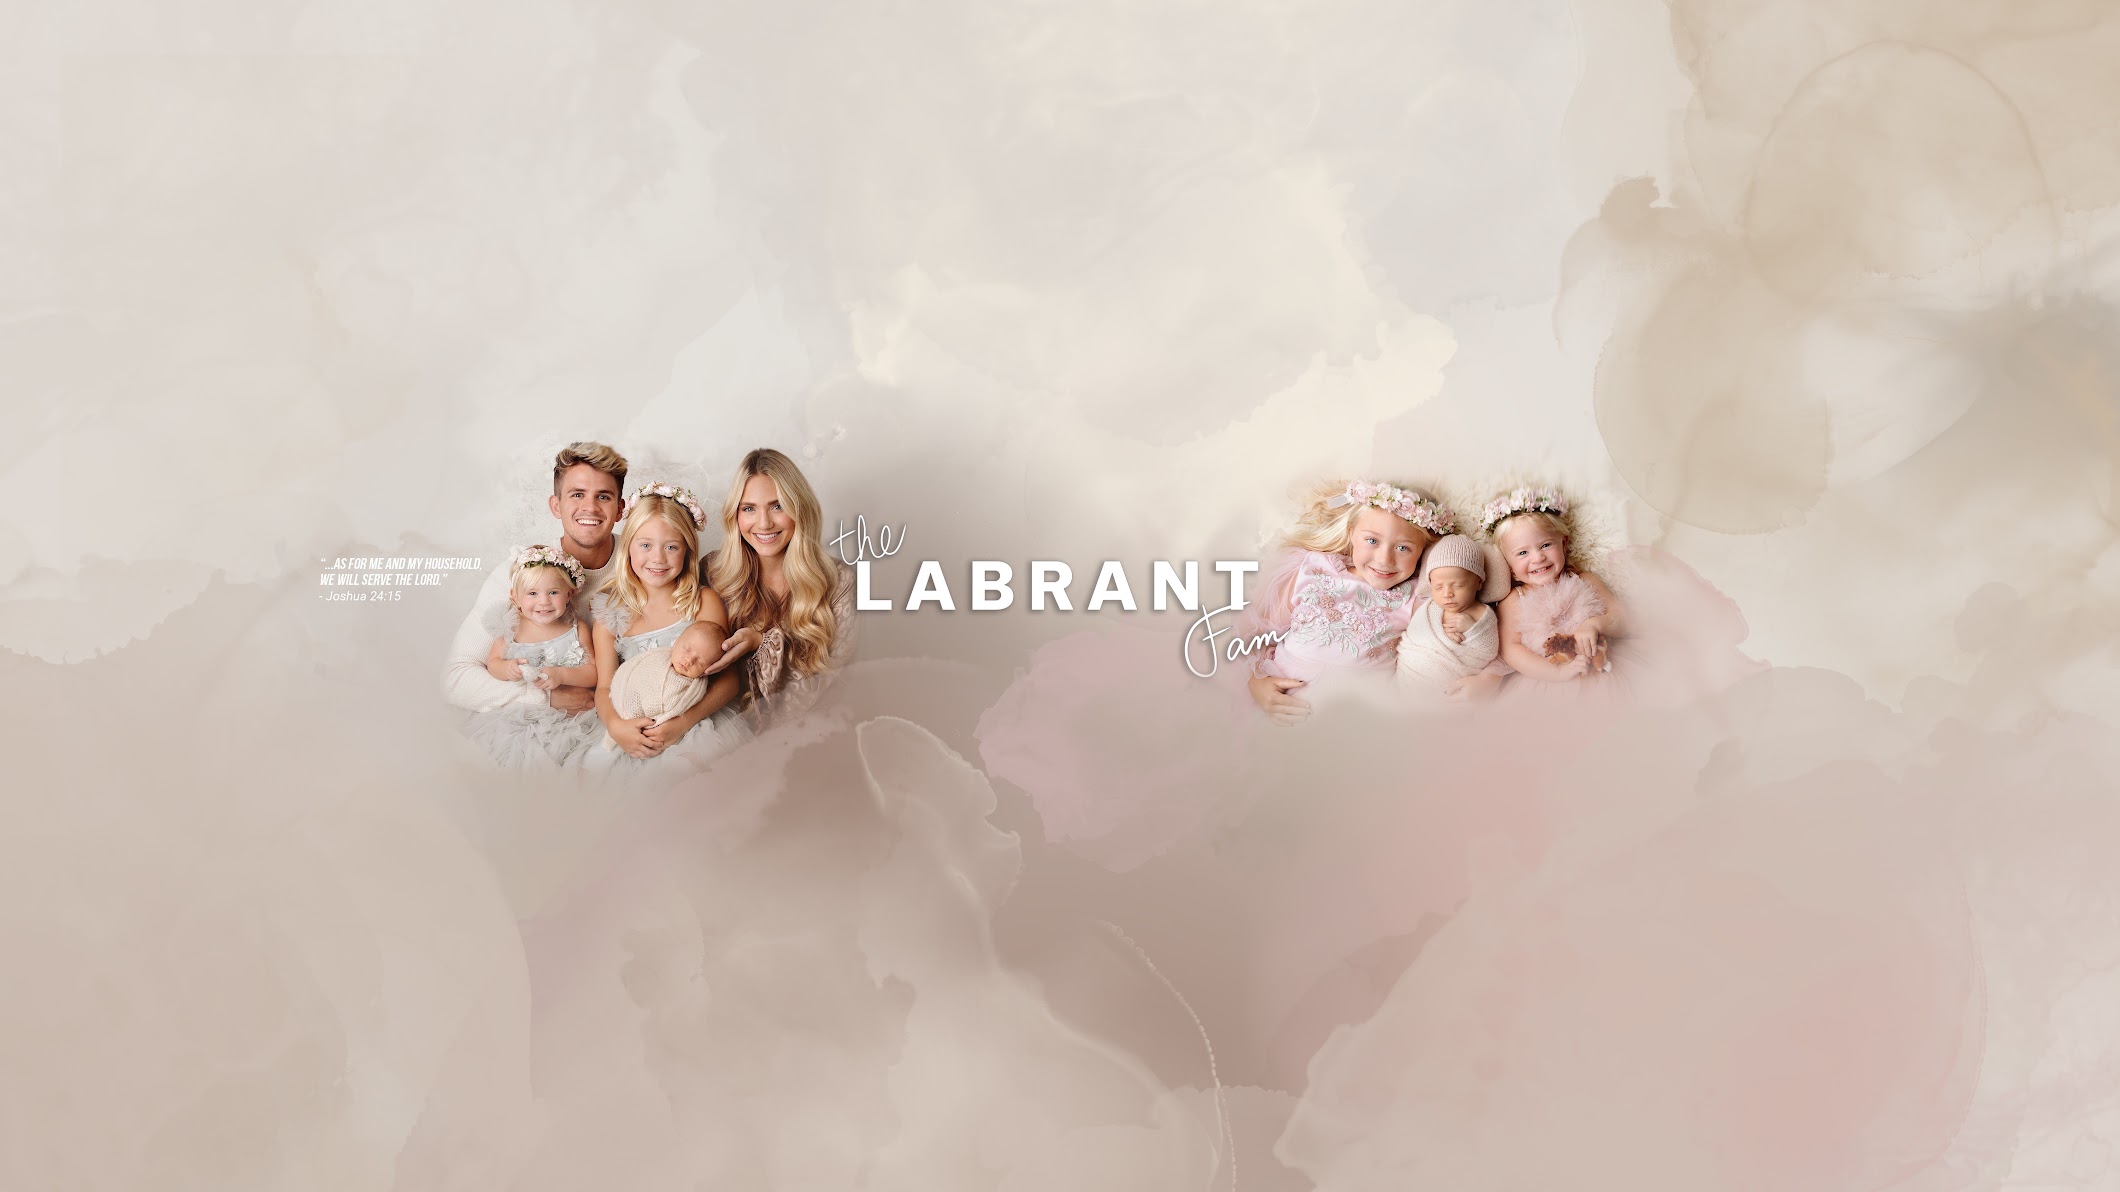 The LaBrant Fam